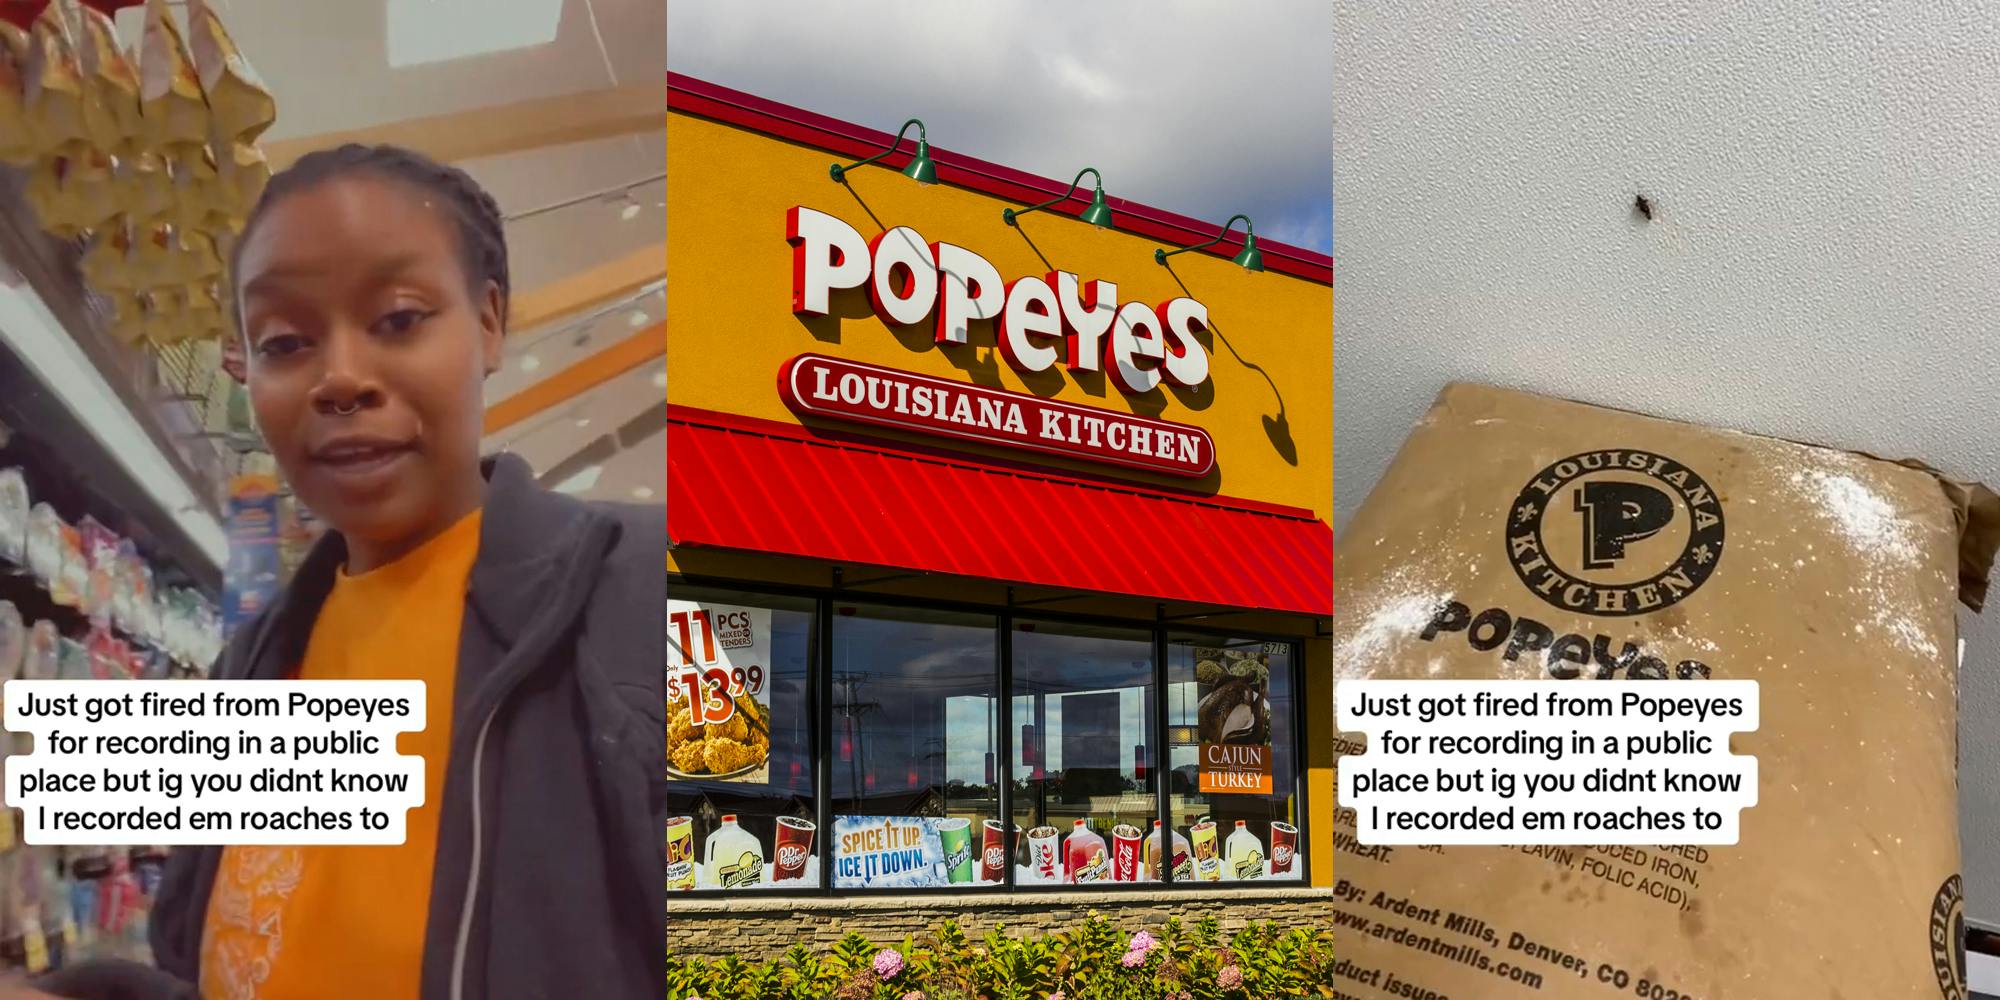 former Popeyes employee speaking with caption "Just got fired from Popeyes for recording in a public place but ig you didn't know I recorded em roaches to" (l) Popeyes building with sign (c) Popeyes interior with roach on wall with caption "Just got fired from Popeyes for recording in a public place but ig you didn't know I recorded em roaches to" (r)